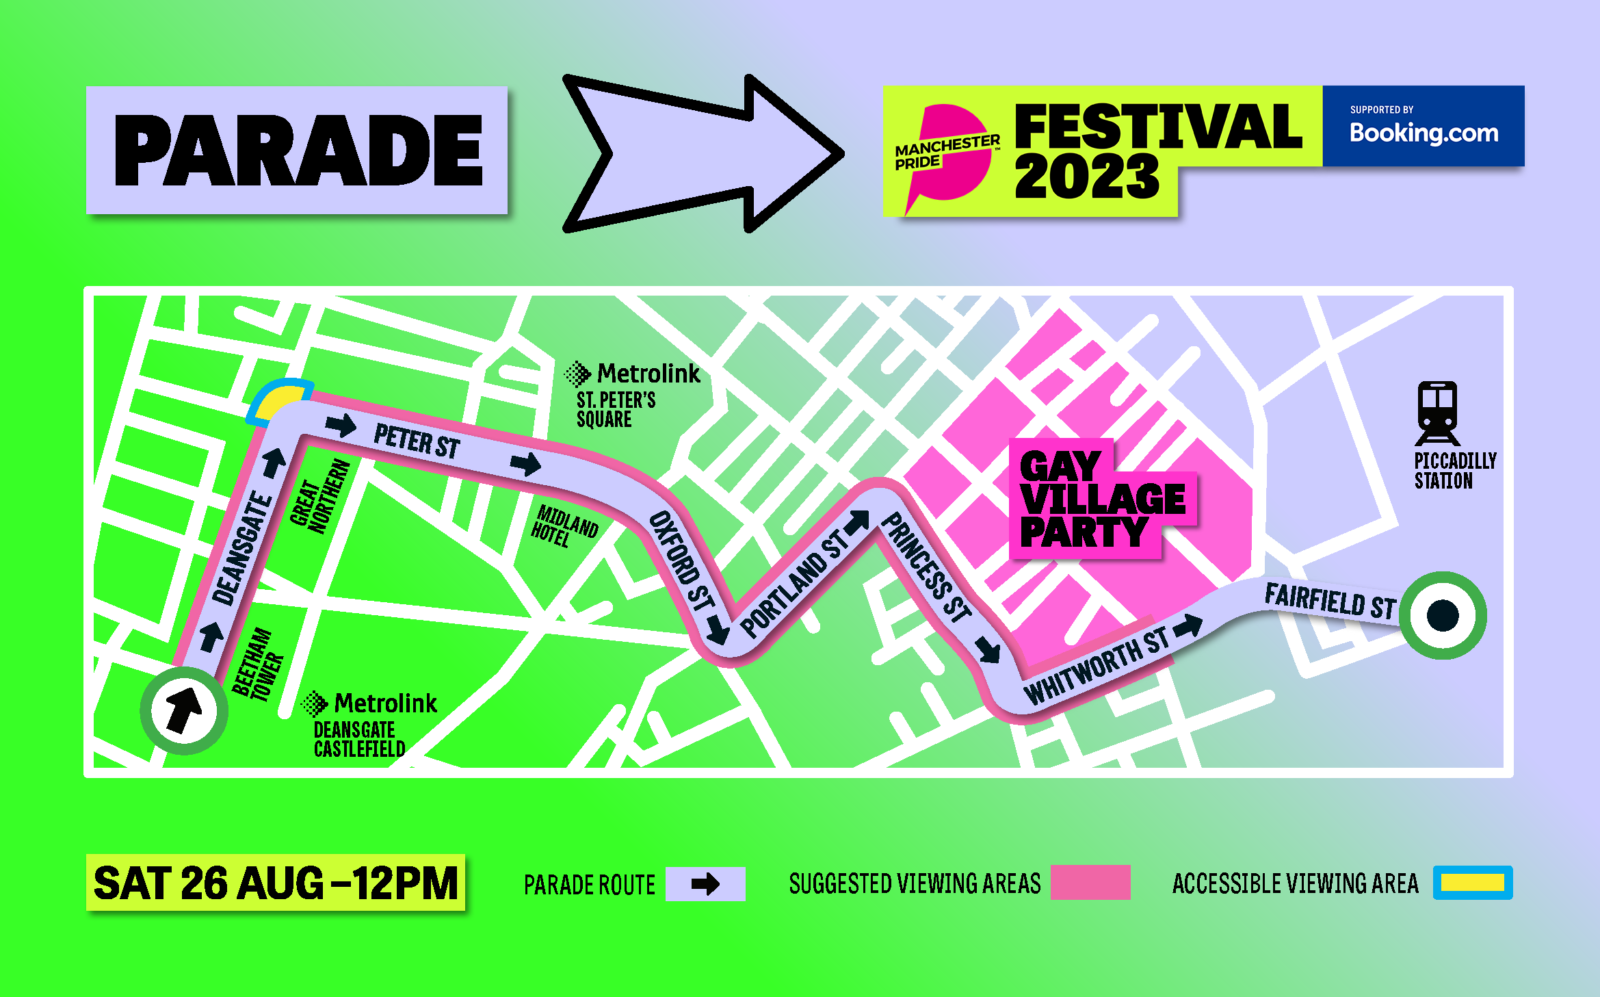 The Manchester Pride 2023 parade route